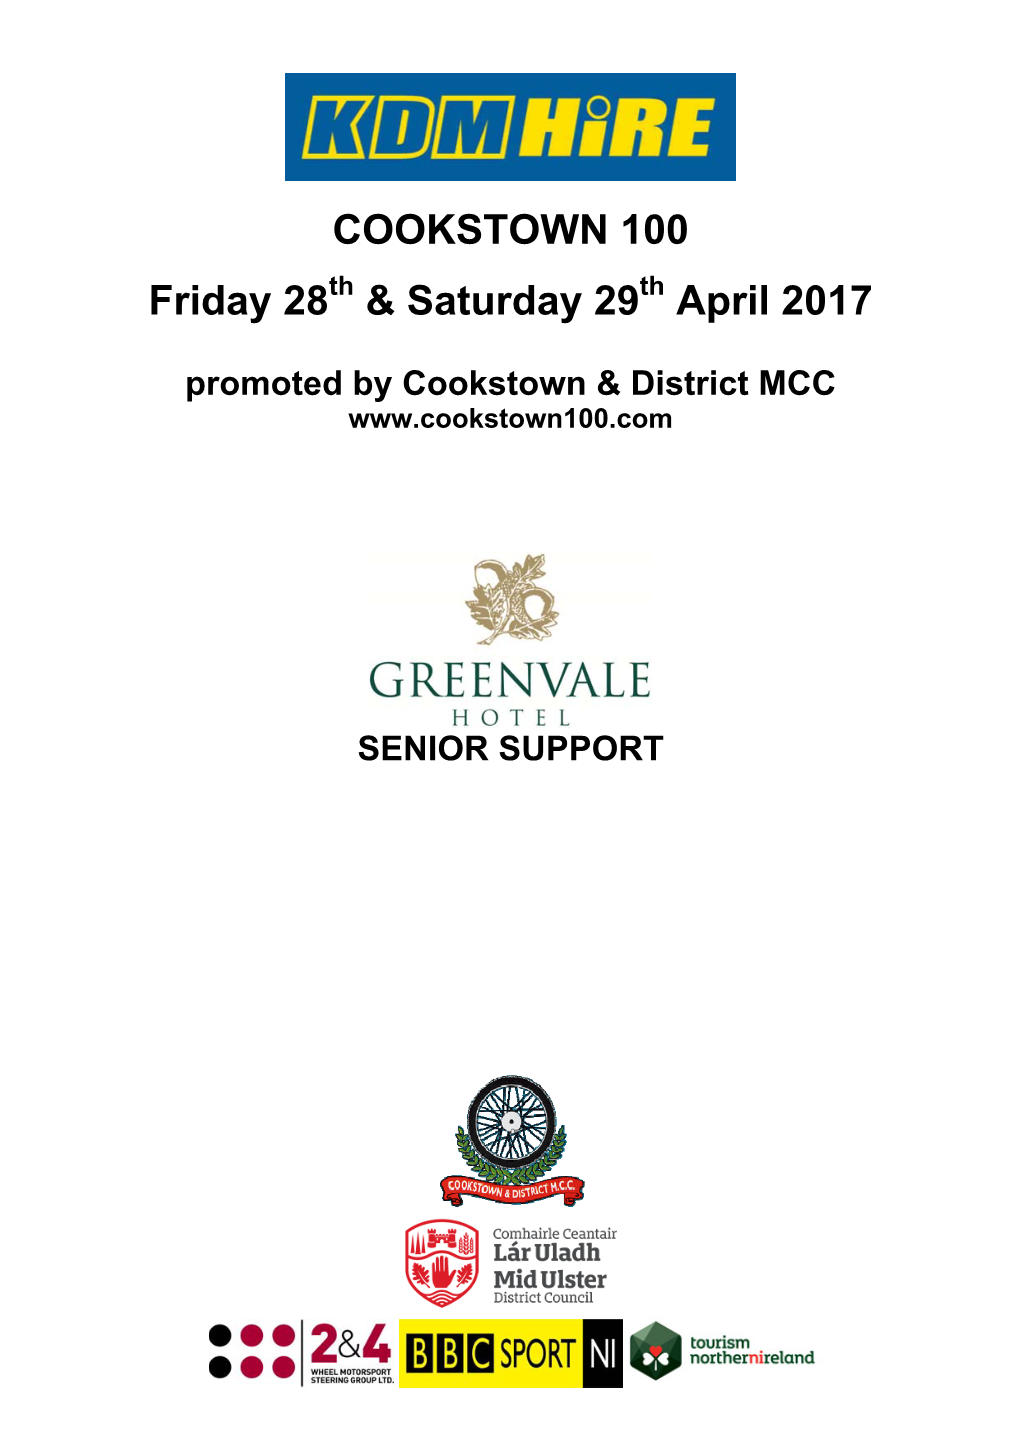 COOKSTOWN 100 Friday 28 & Saturday 29 April 2017